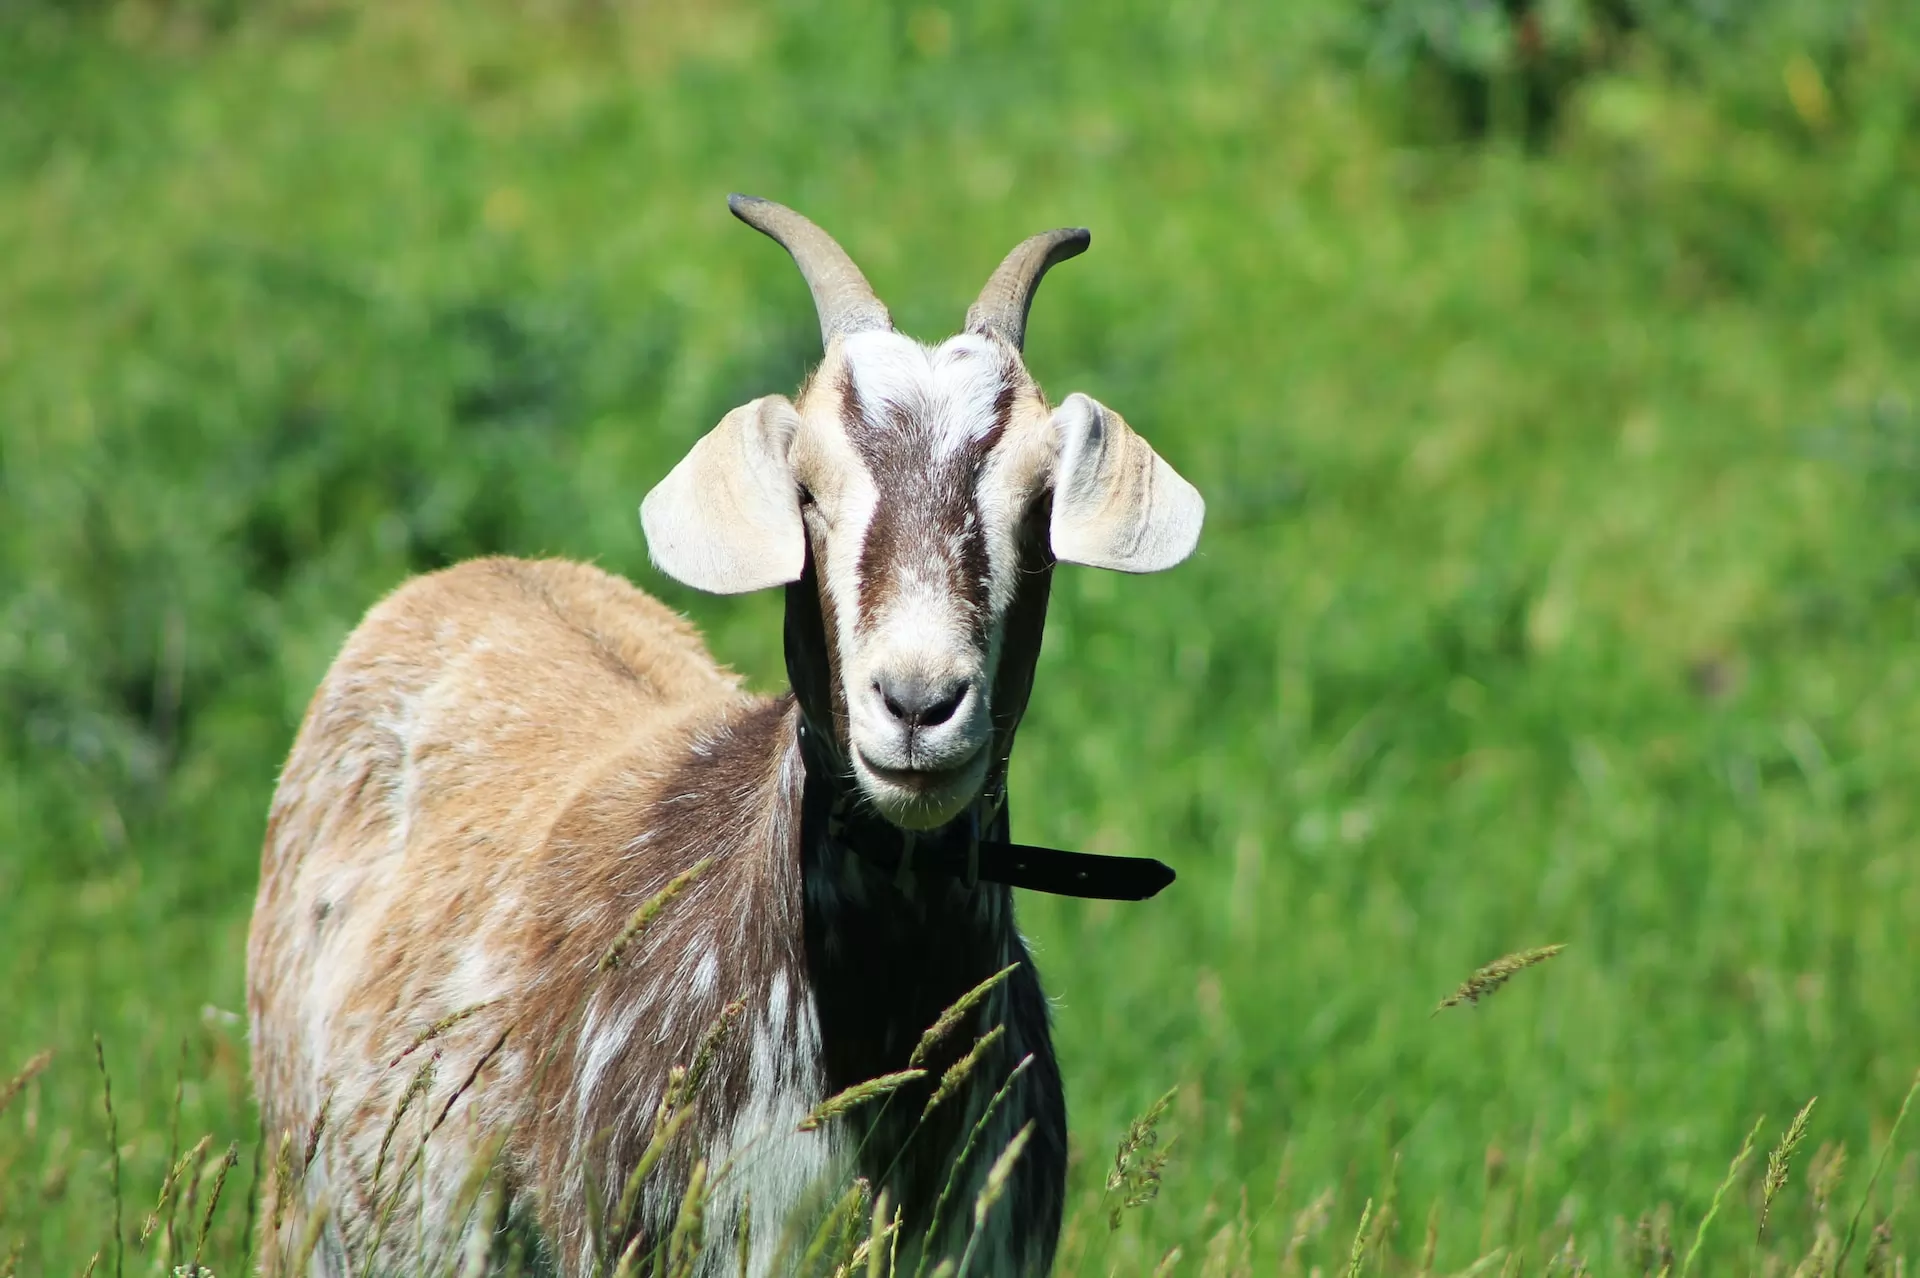 The Sheep and Goat Farming market